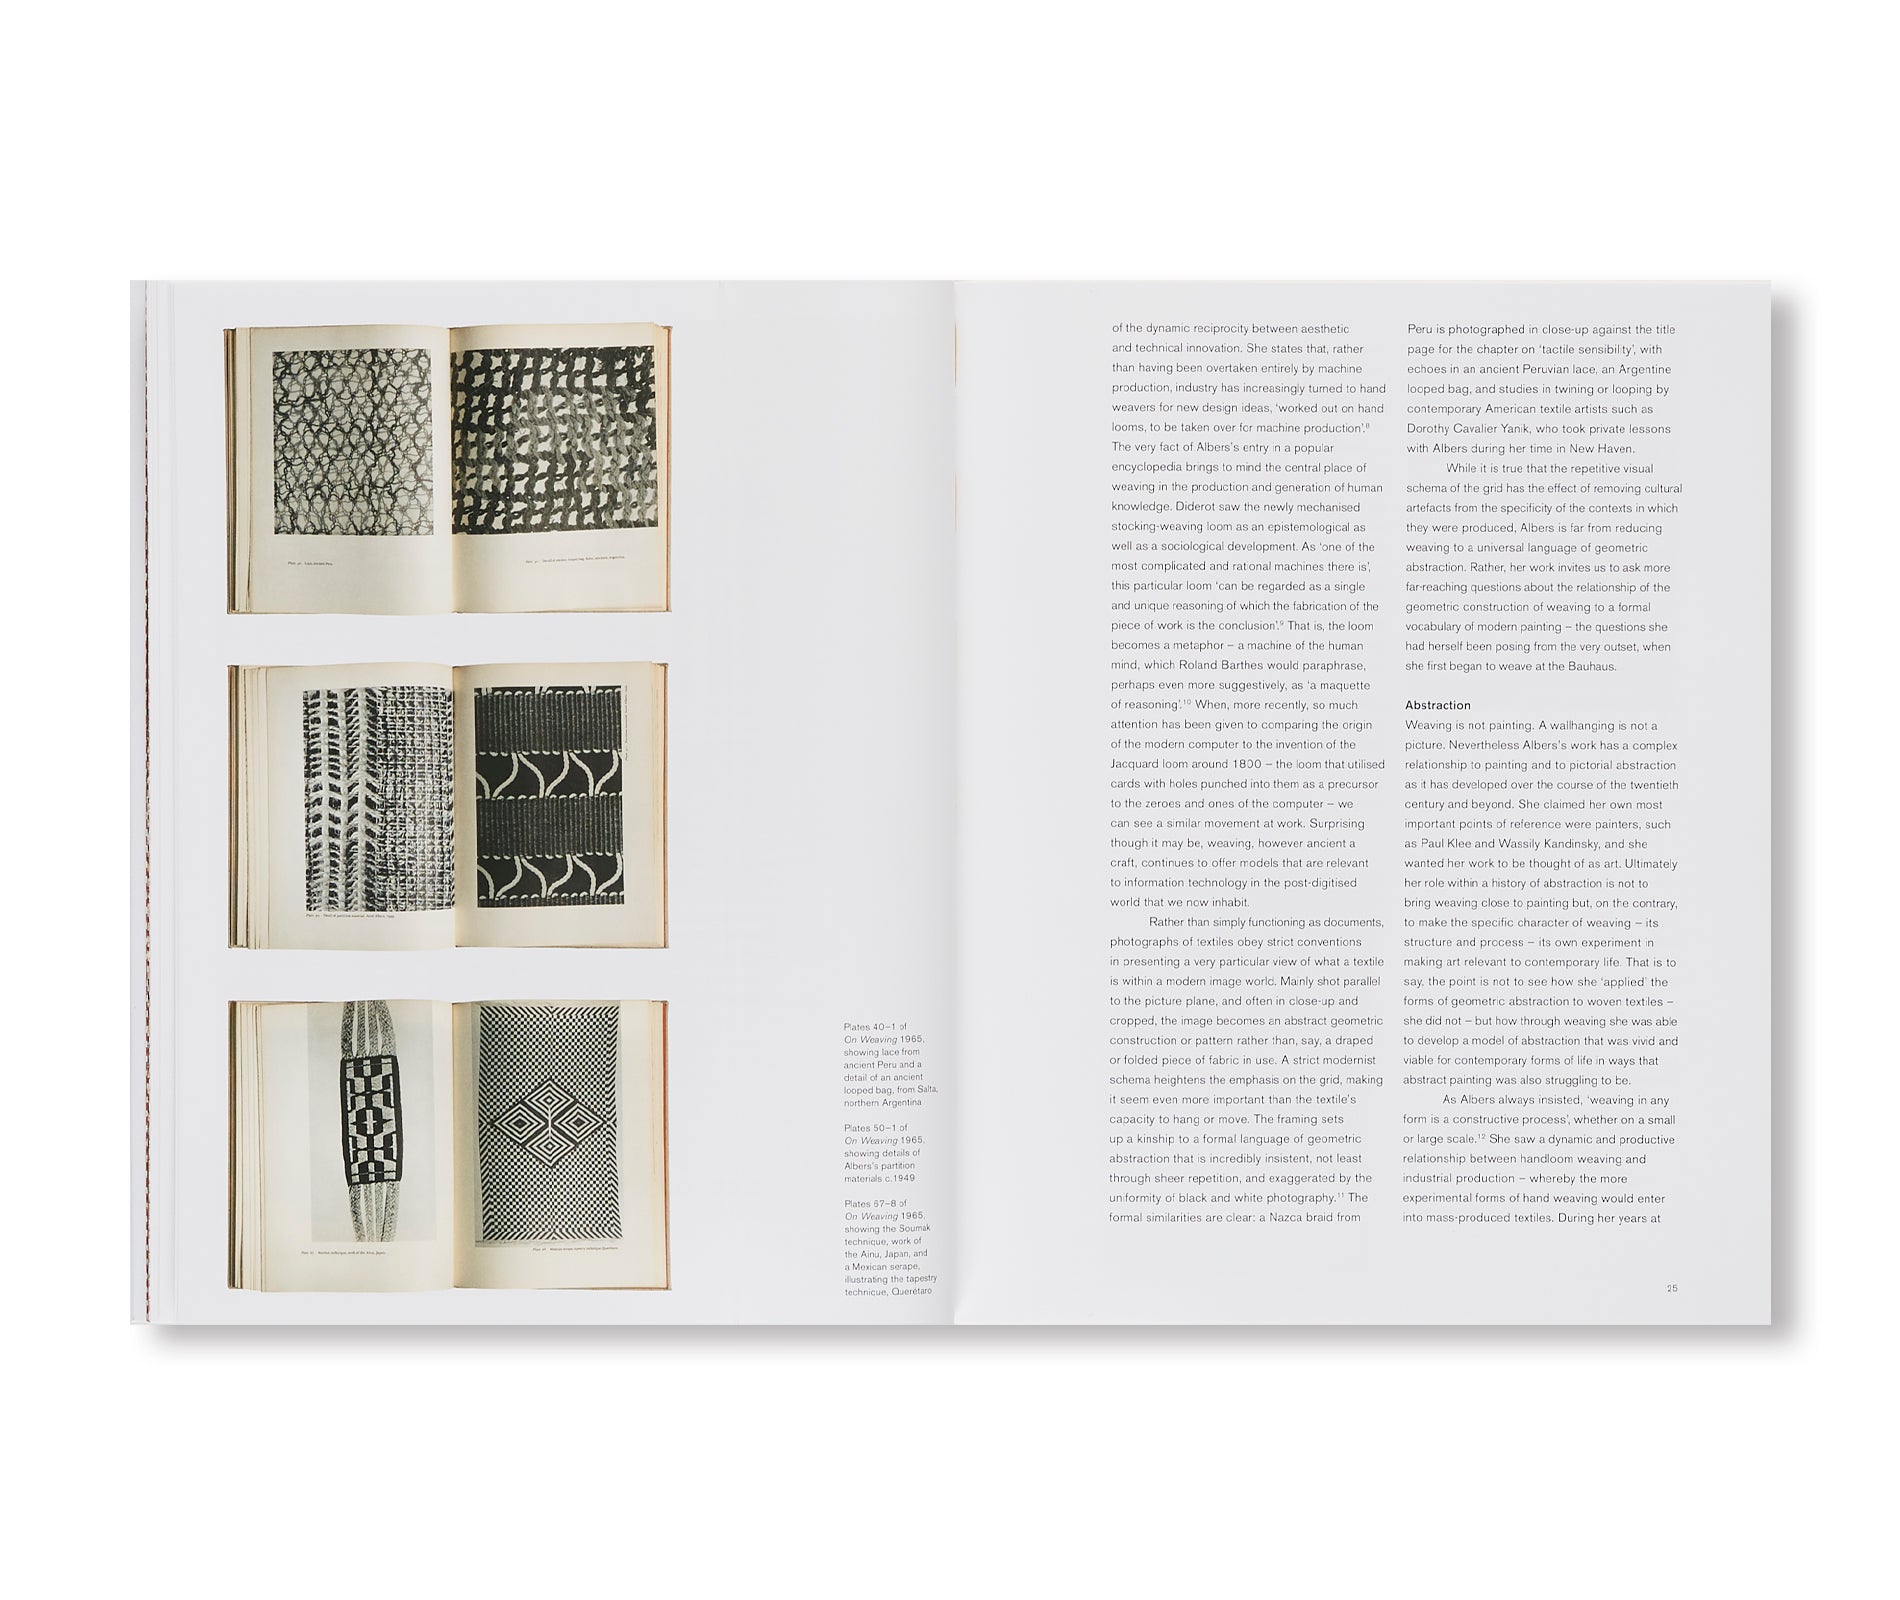 ANNI ALBERS by Anni Albers